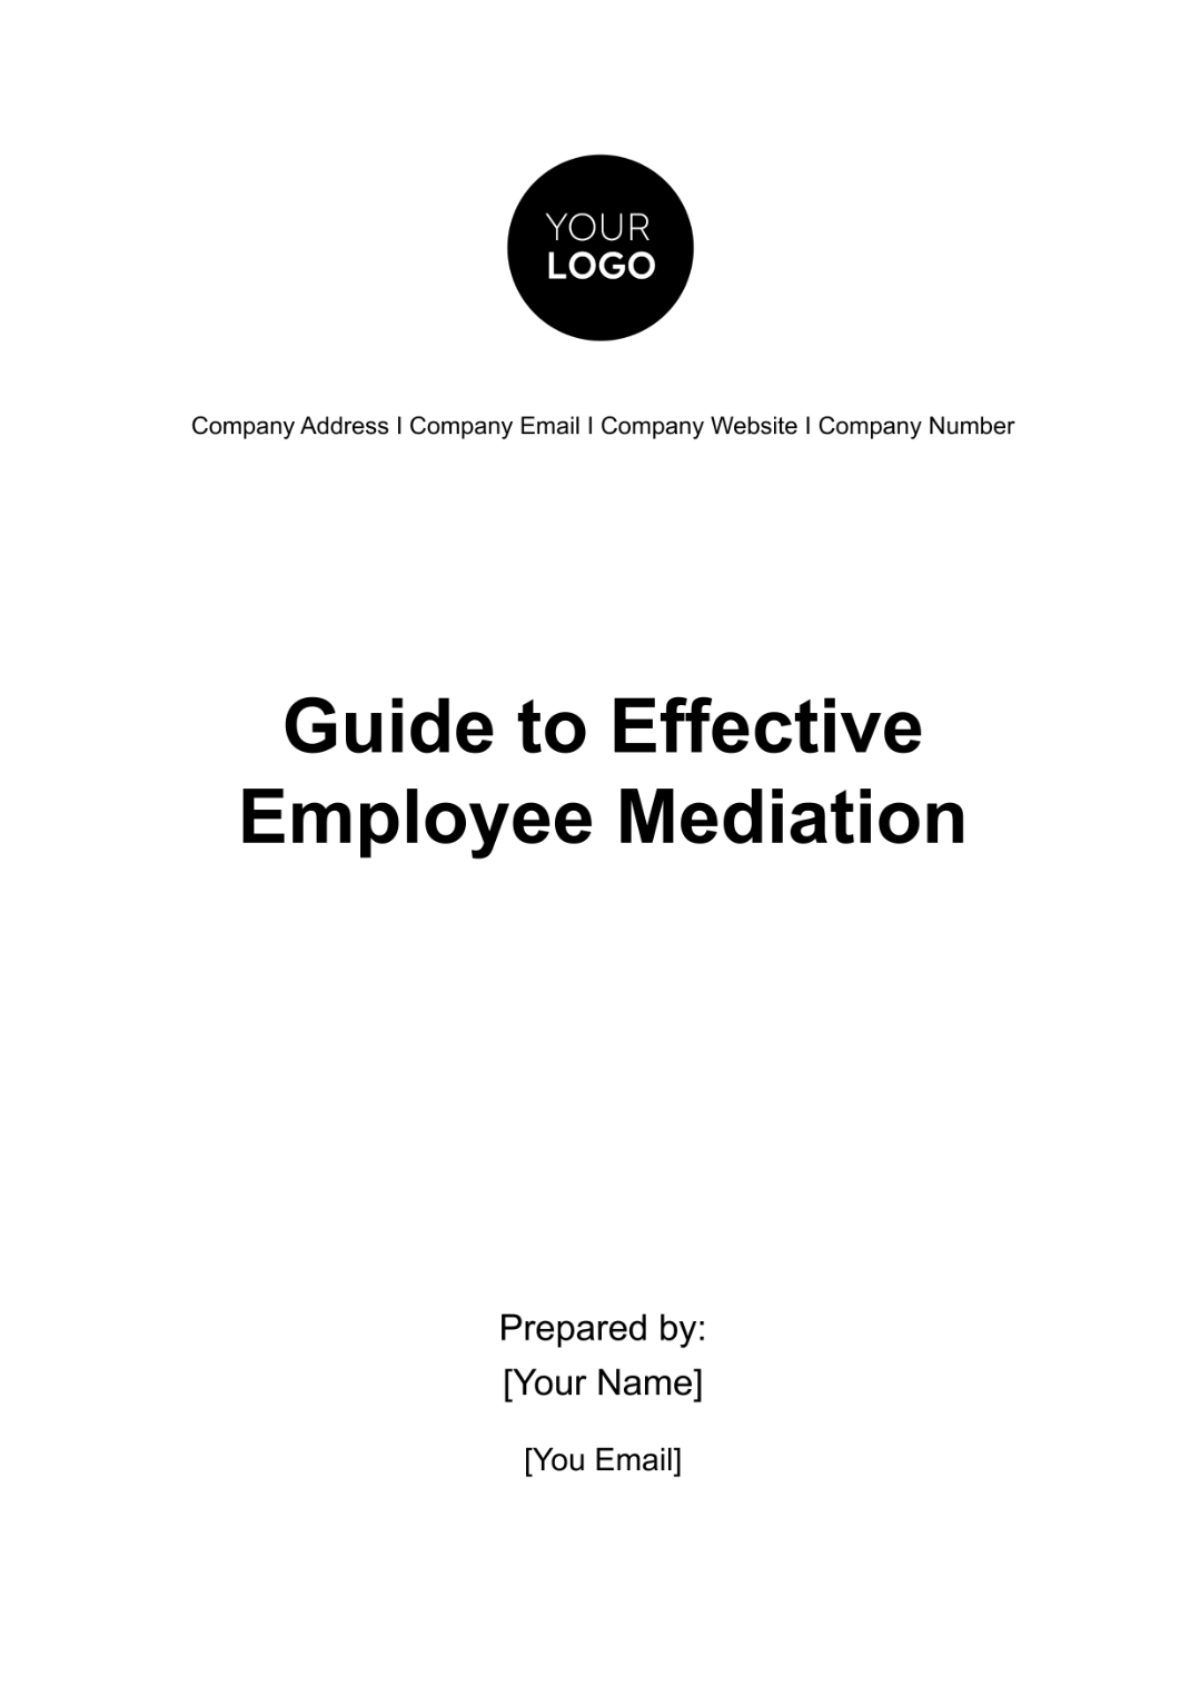 Free Guide to Effective Employee Mediation HR Template